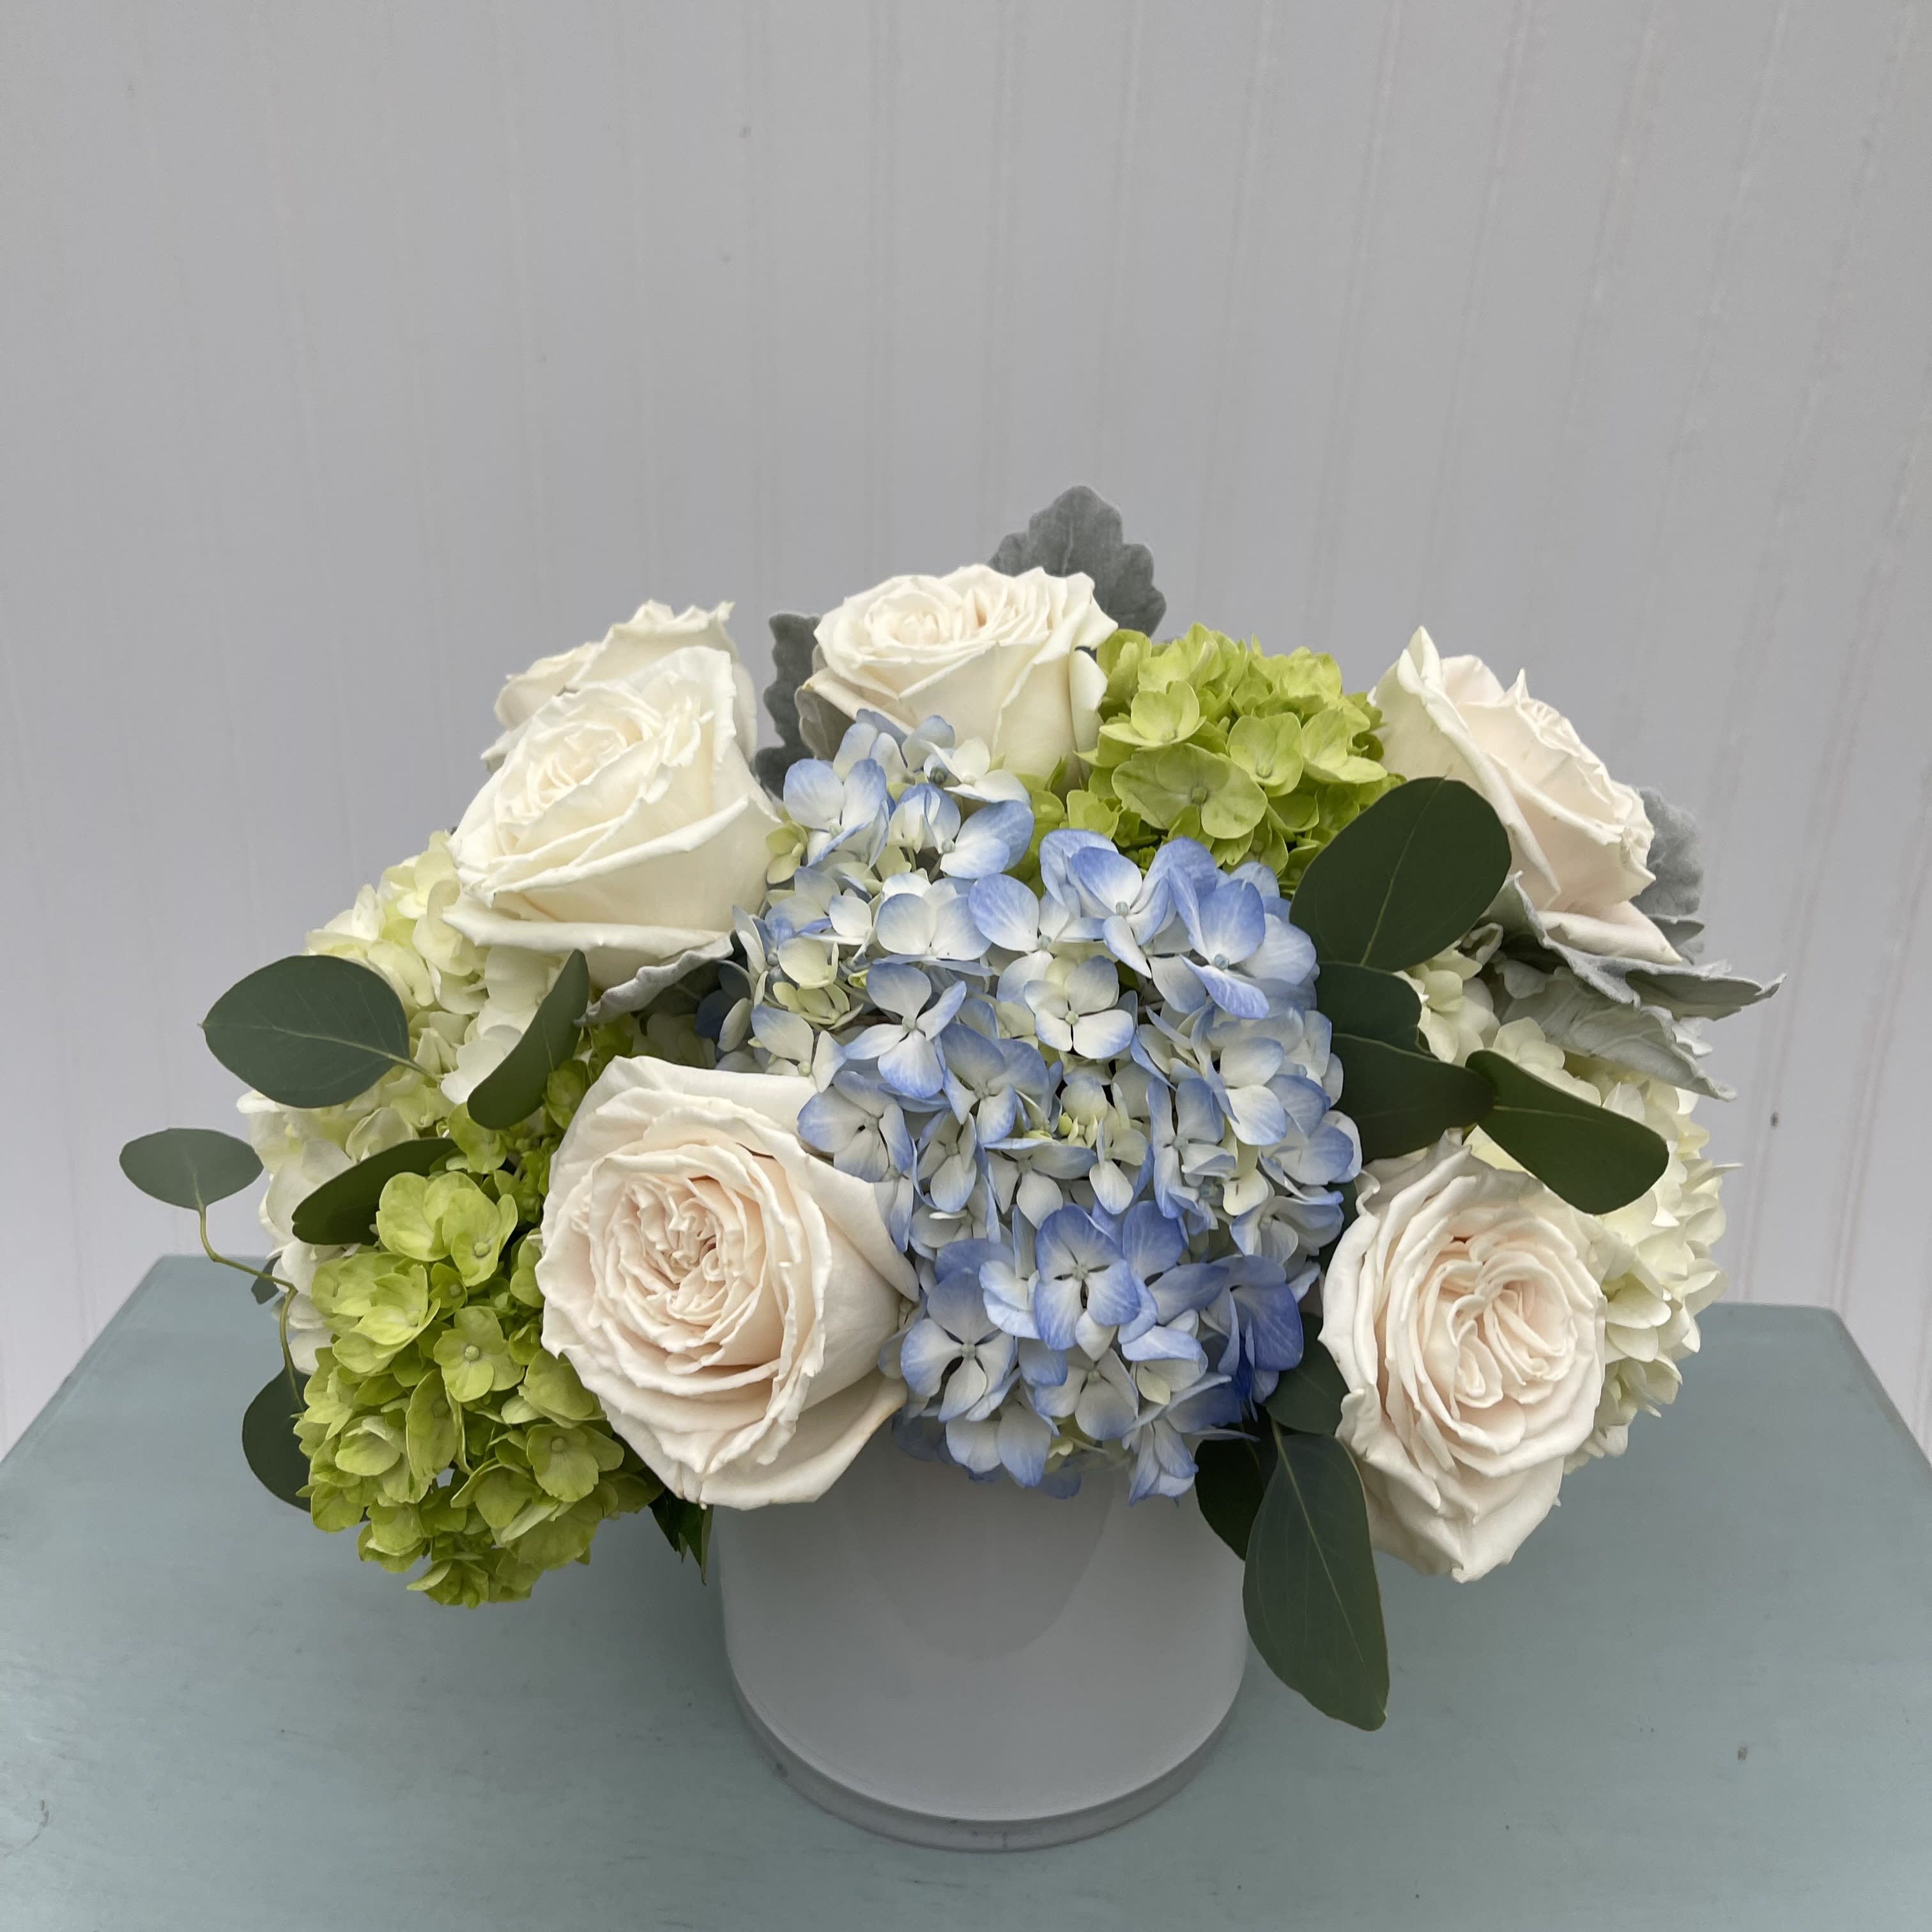 Light + Love  - Soothing blue, green and white hydrangea and roses arranged in a low white glass vase. 